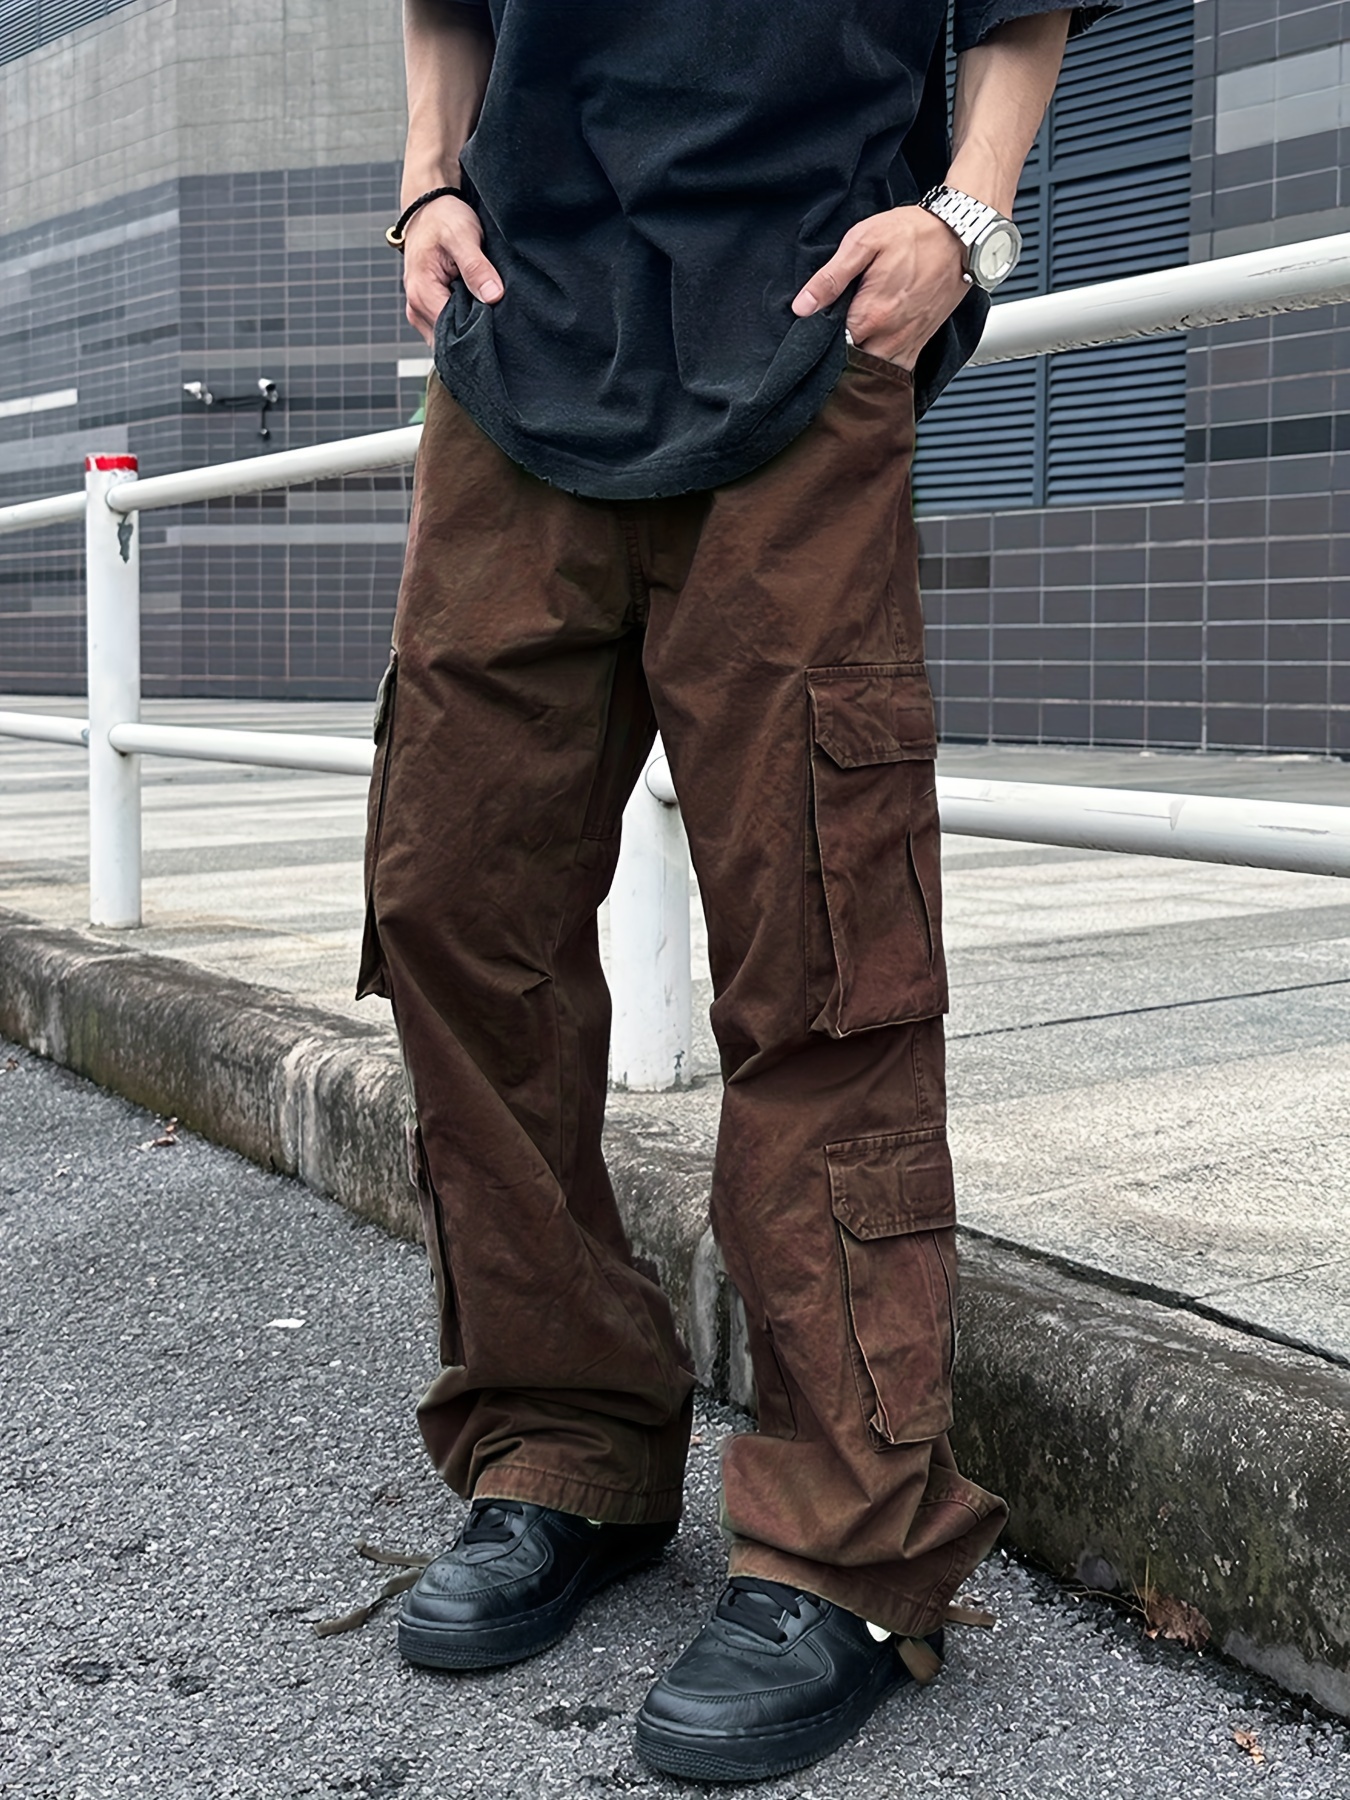 Cargo Solid Baggy Pants, Cargo Pant for Men, Pocket Cargo Pant, Polyester  Cargo Pant, कार्गो पैंट - KNOT JOY, Ahmedabad